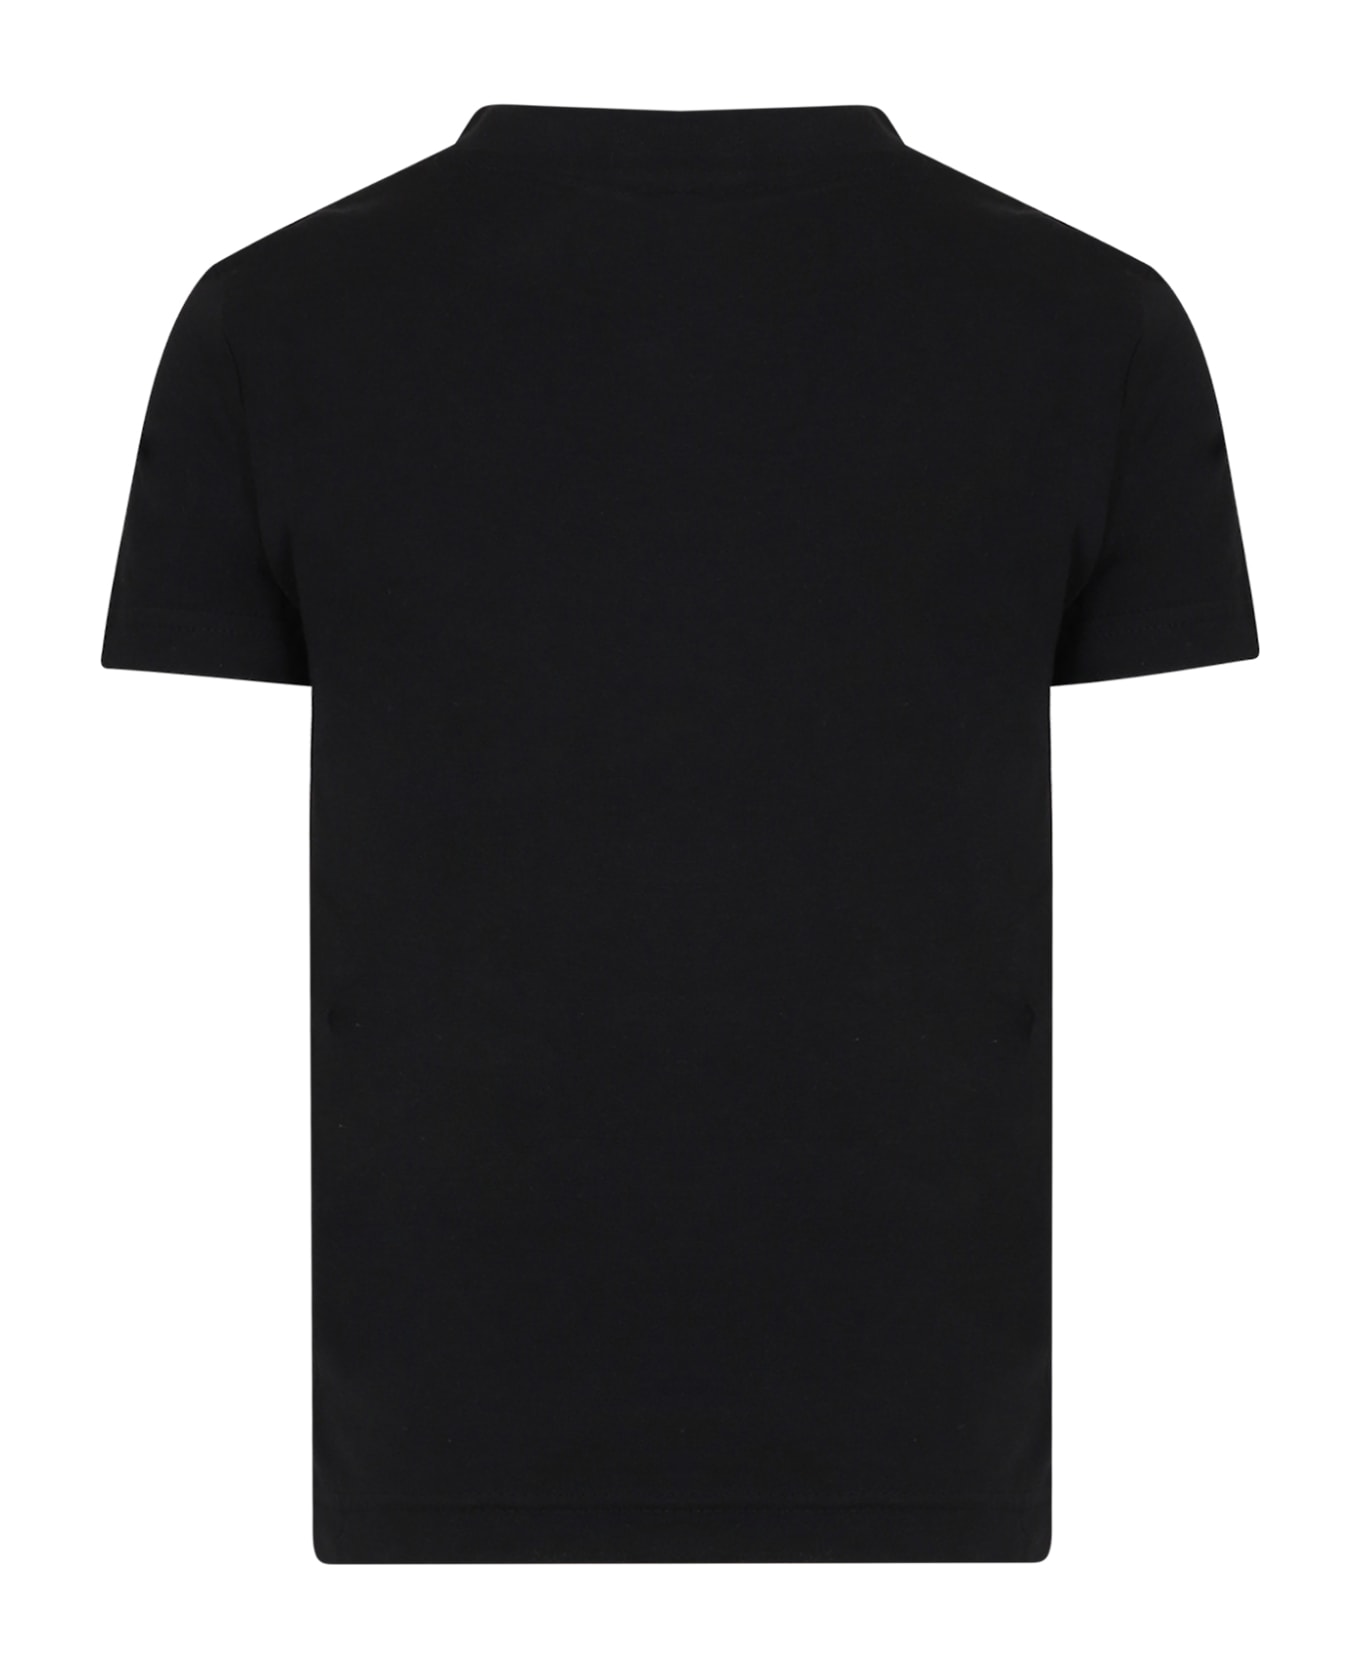 Lacoste Black T-shirt For Boy With Crocodile - Black